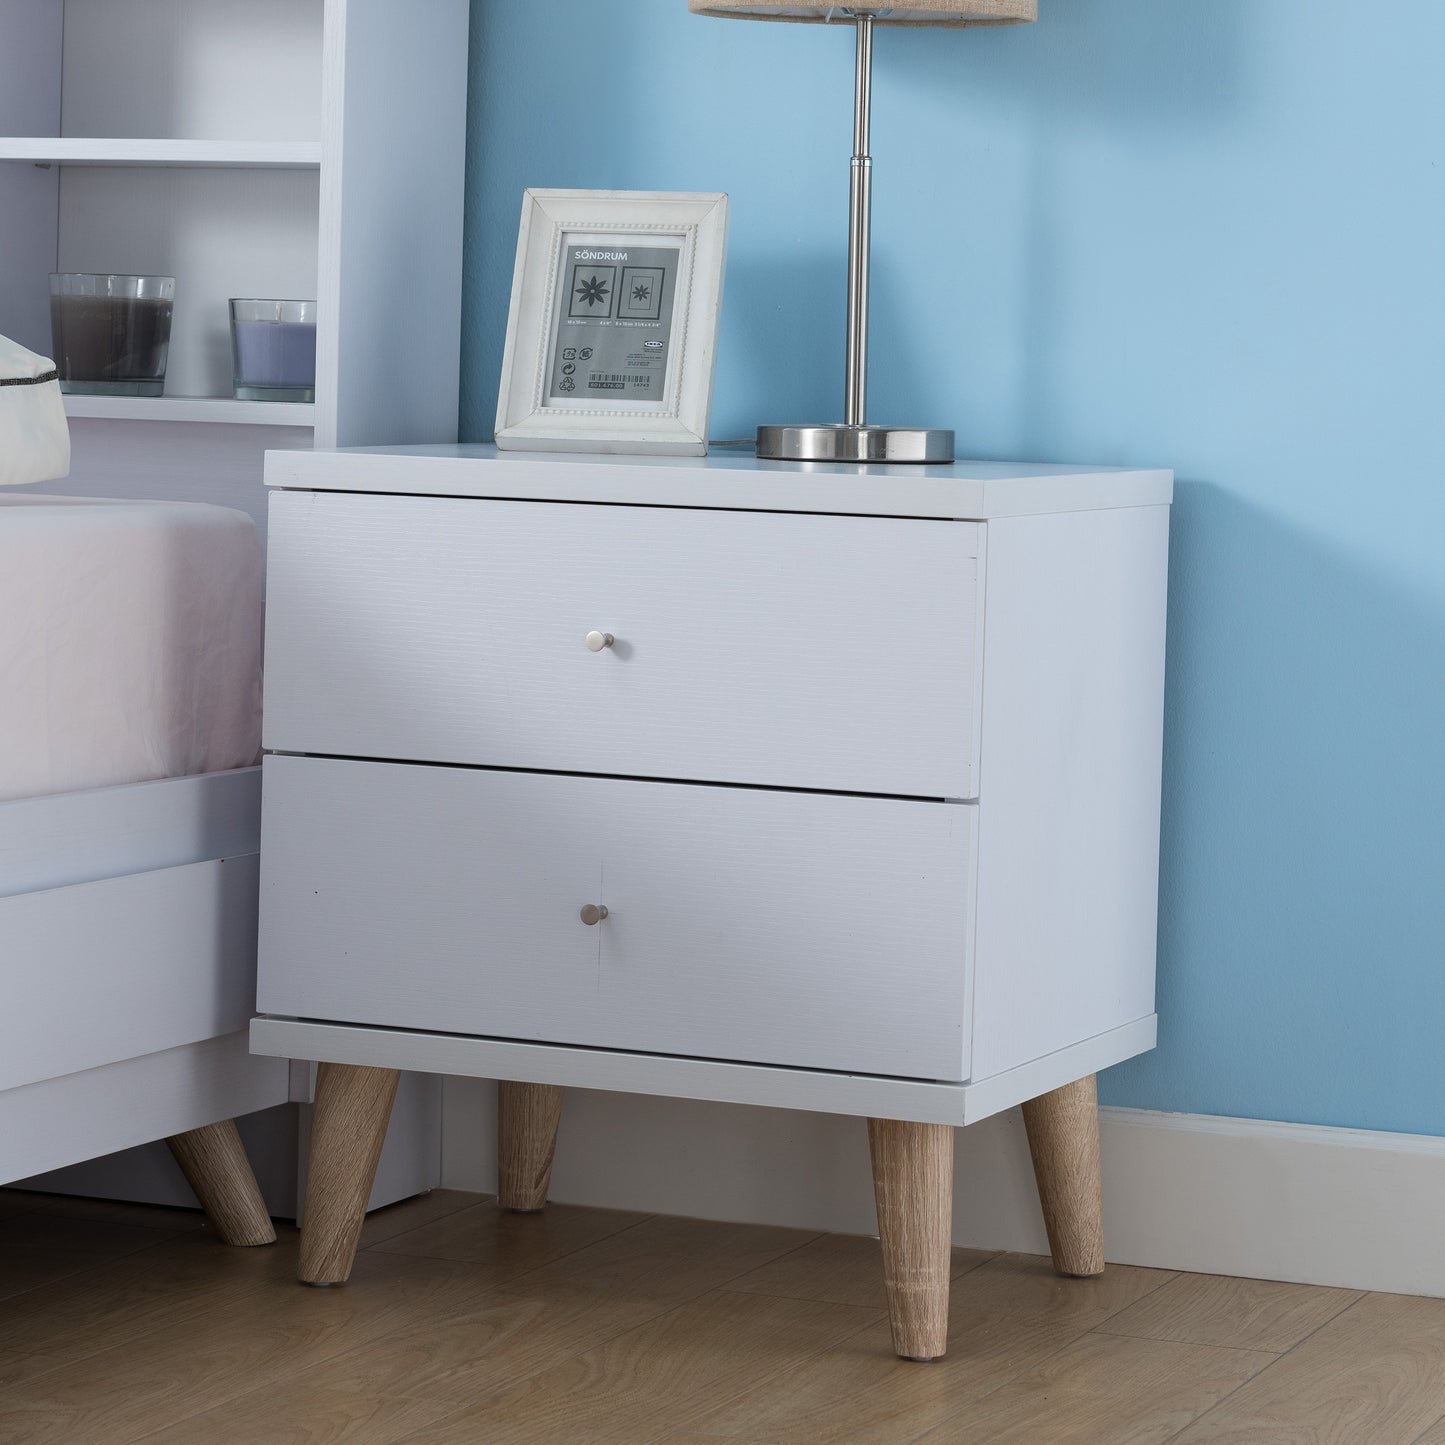 Left angled mid-century modern white two-drawer nightstand in a bedroom with accessories